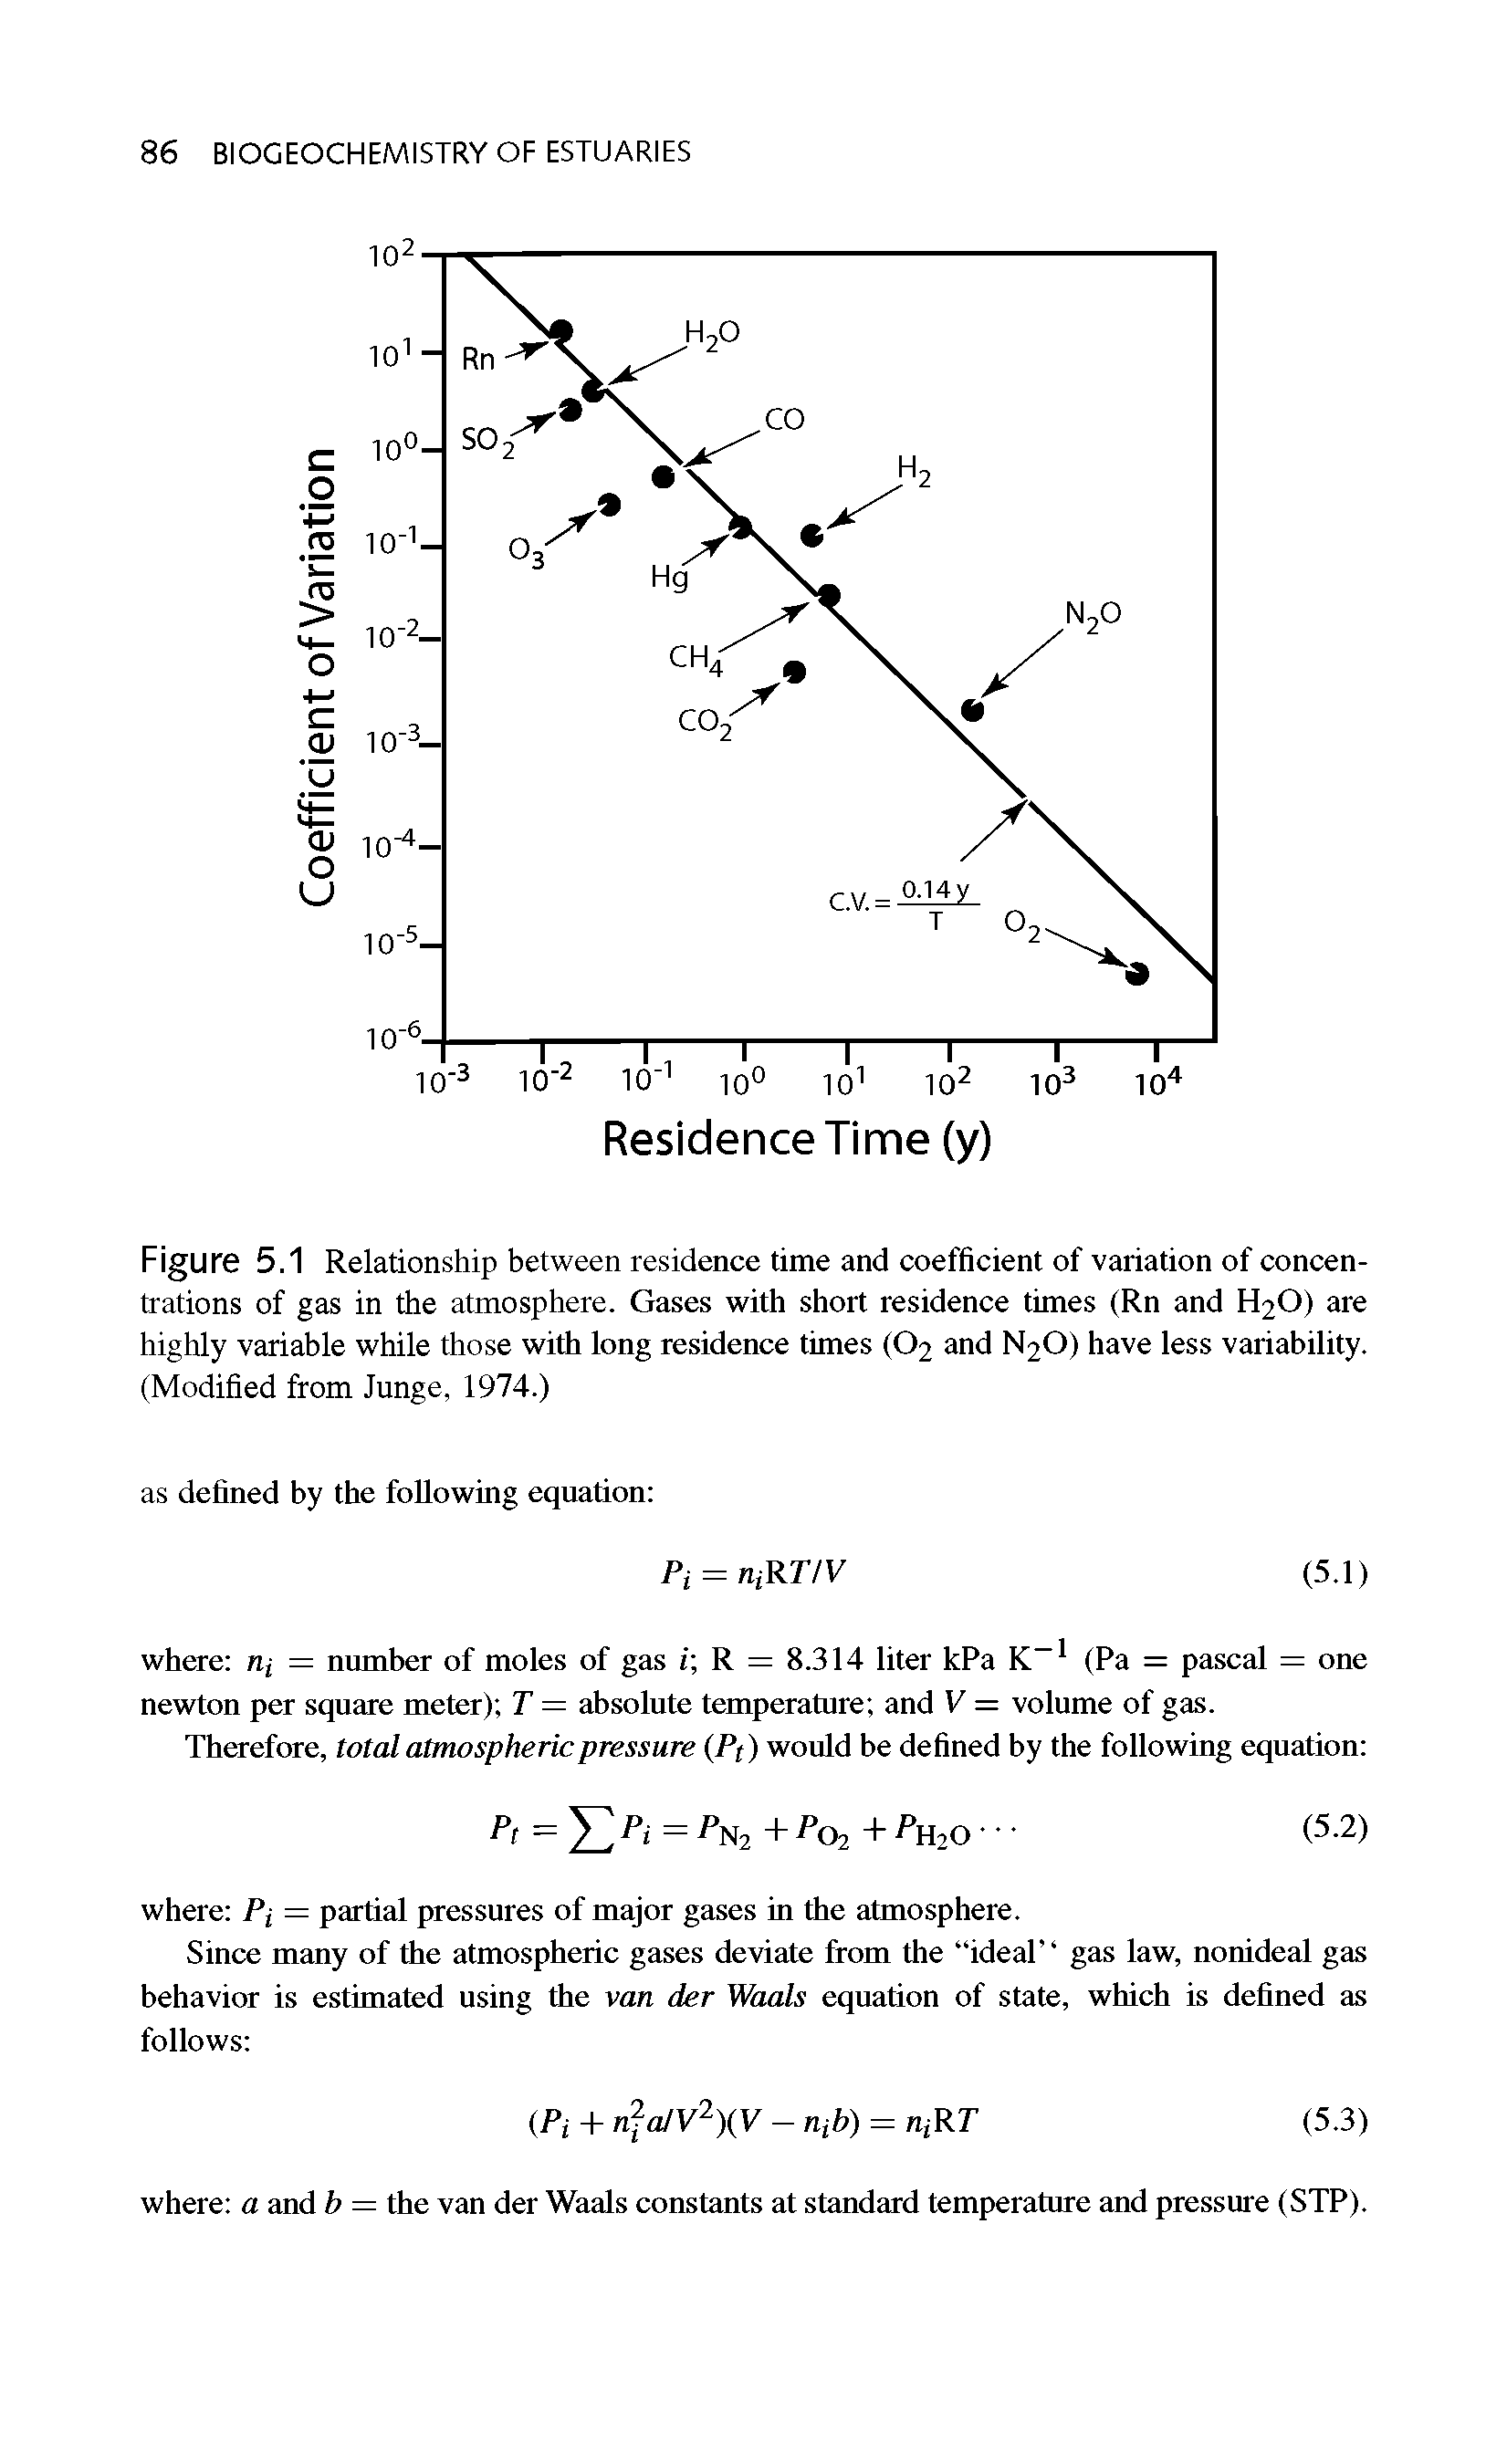 Figure 5.1 Relationship between residence time and coefficient of variation of concentrations of gas in the atmosphere. Gases with short residence times (Rn and H2O) are highly variable while those with long residence times (O2 and N2O) have less variability. (Modified from Junge, 1974.)...